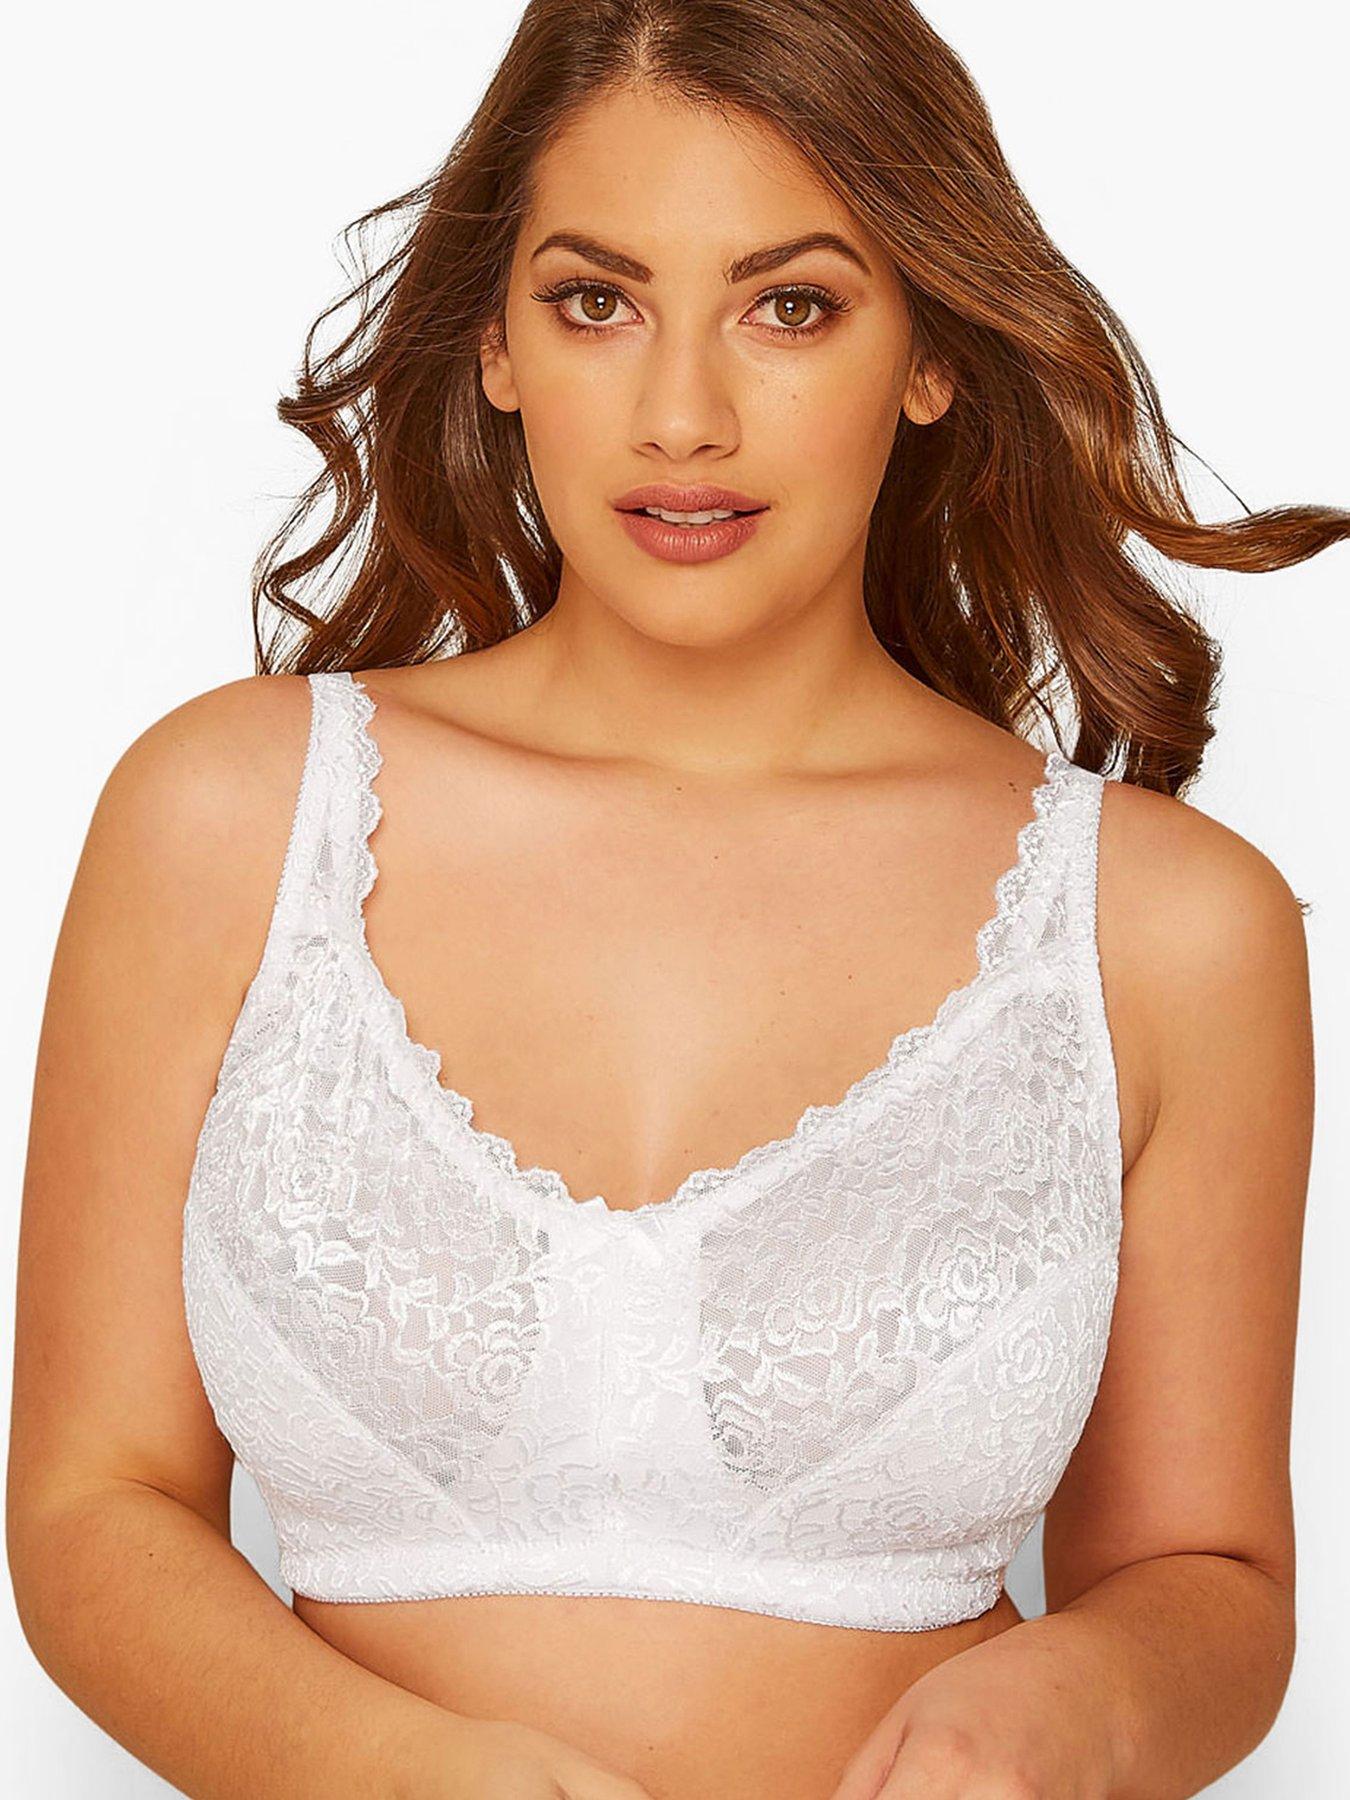 Full Figure Everyday Bras for Women Wireless Ultra-Thin Large Bust Bra  Ladies Bralettes, D to F Cups (Color : White, Size : 90/40E)